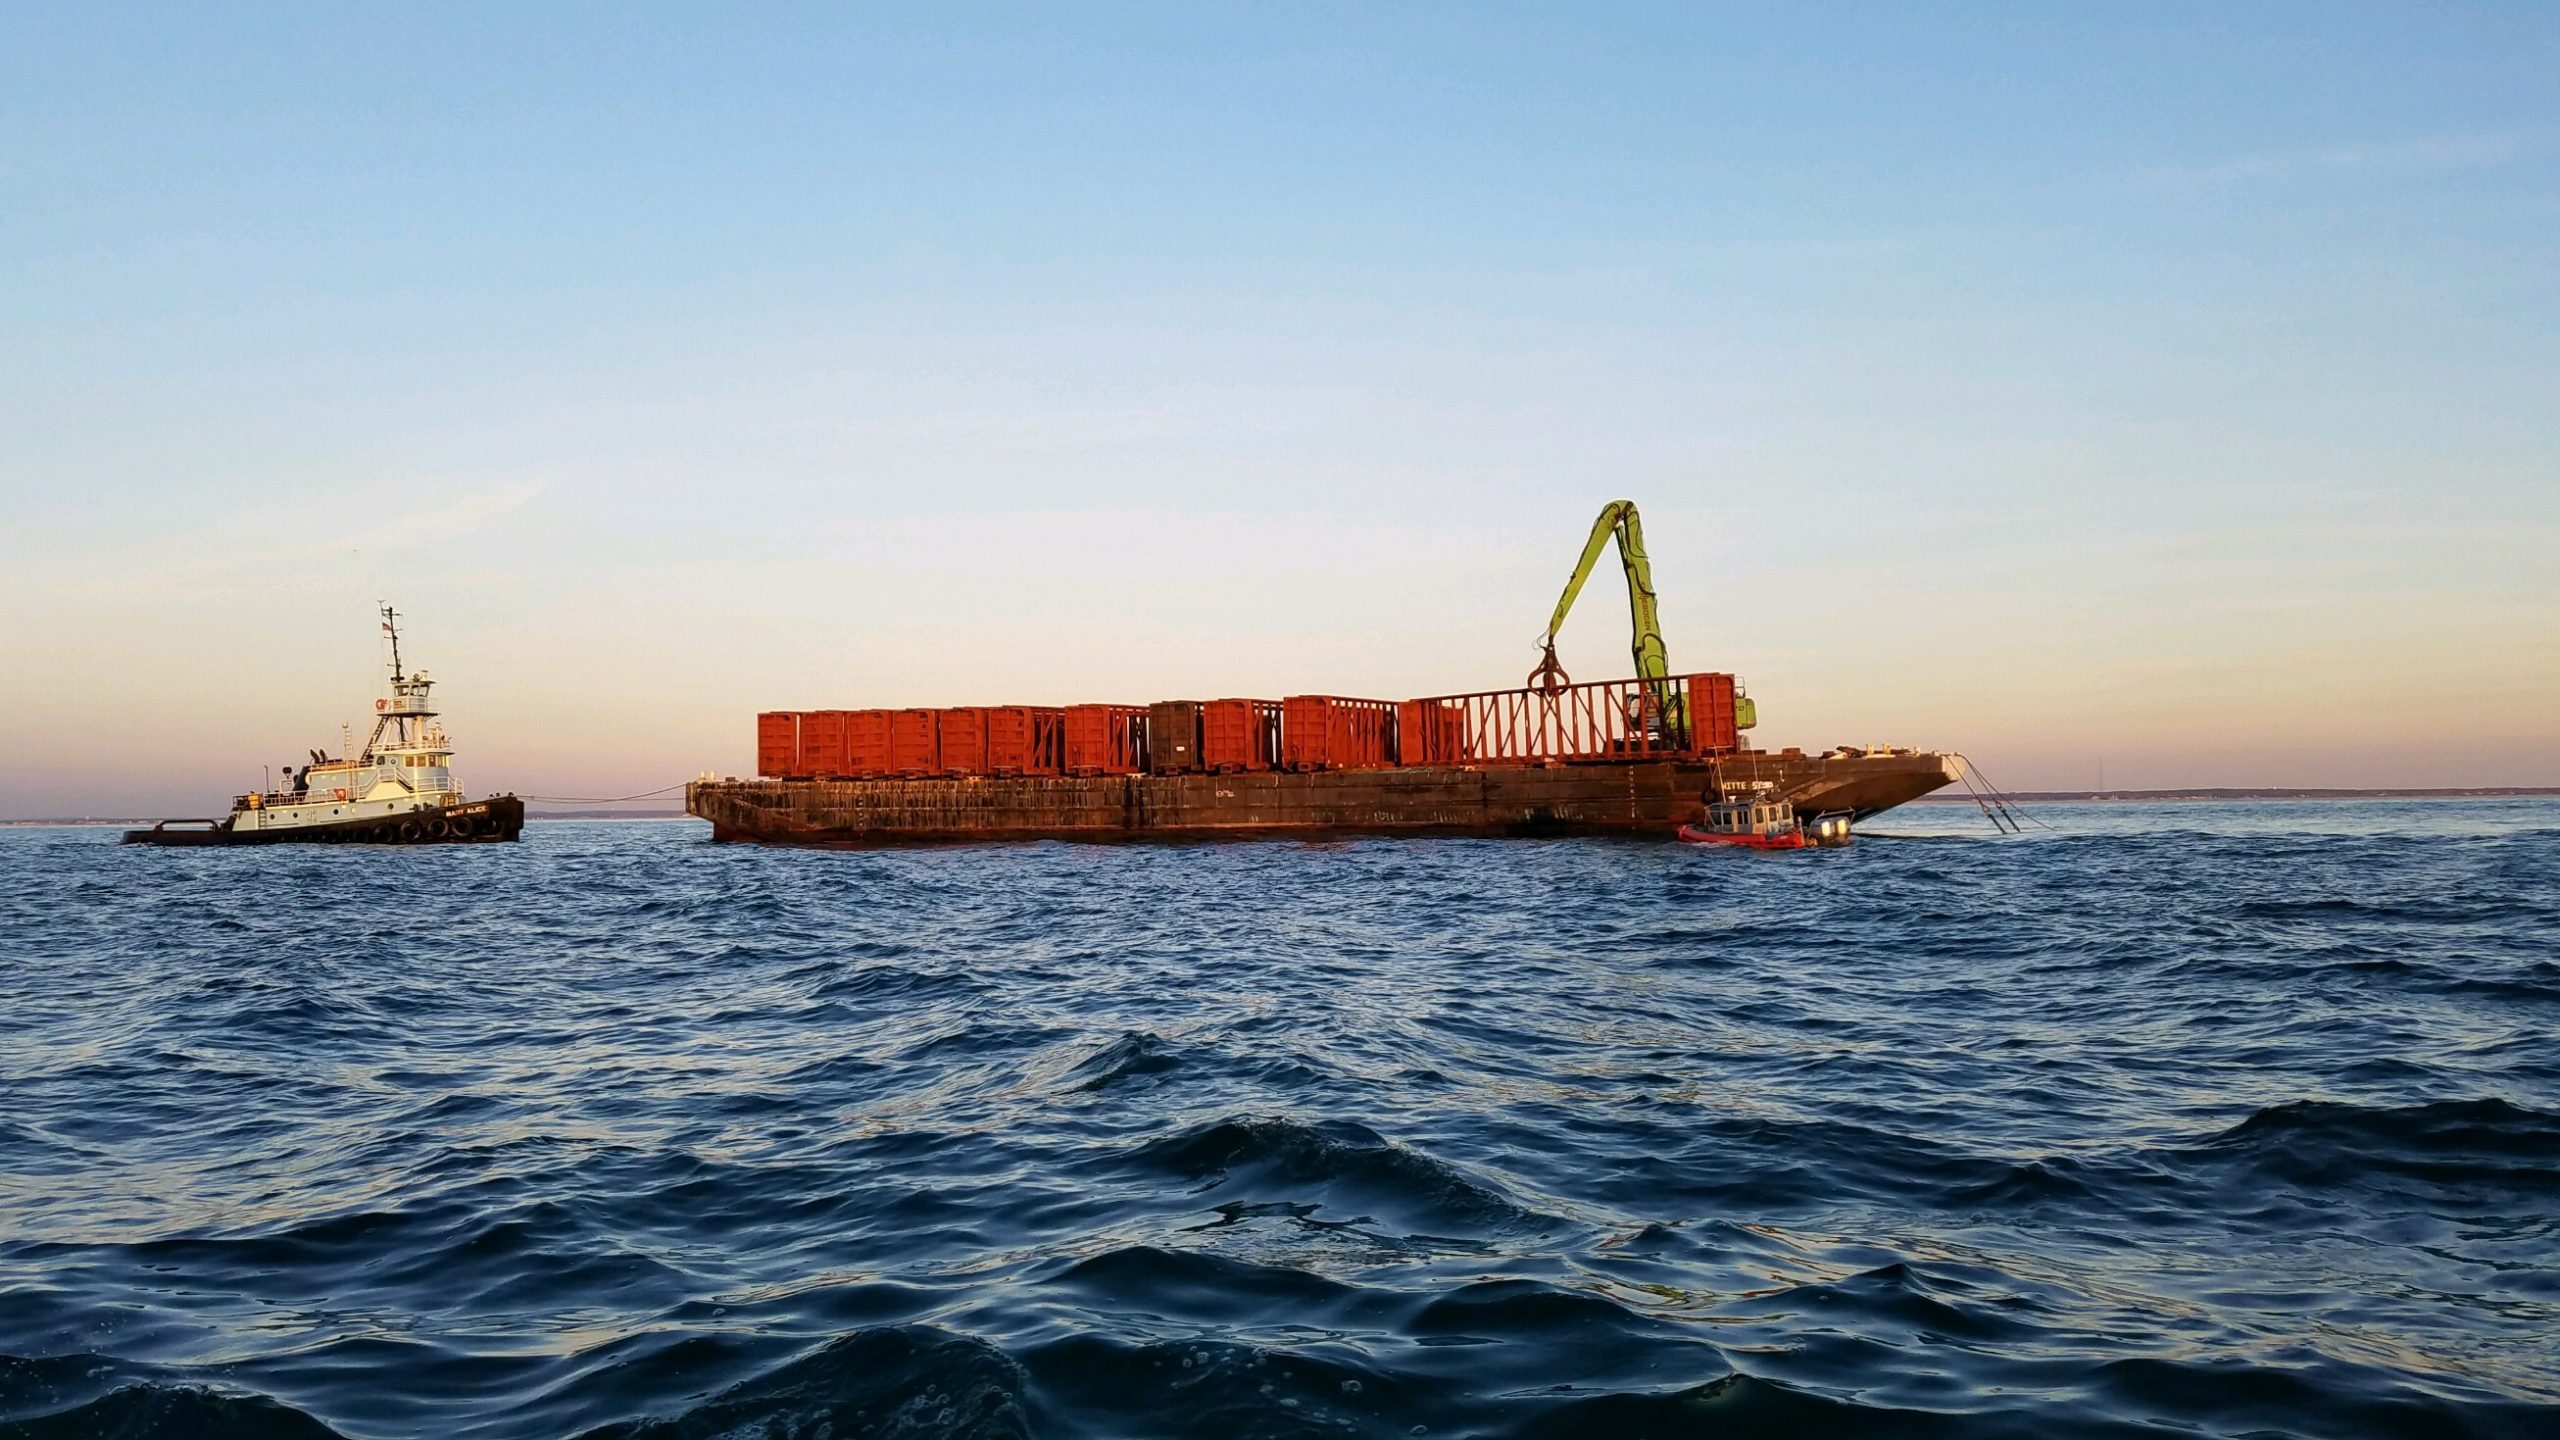 New York State added a dozen former railroad cars to the artificial reefs off Shinnecock and Moriches inlets late last month in hopes of boosting fishing for species like porgies, black fish and black sea bass.